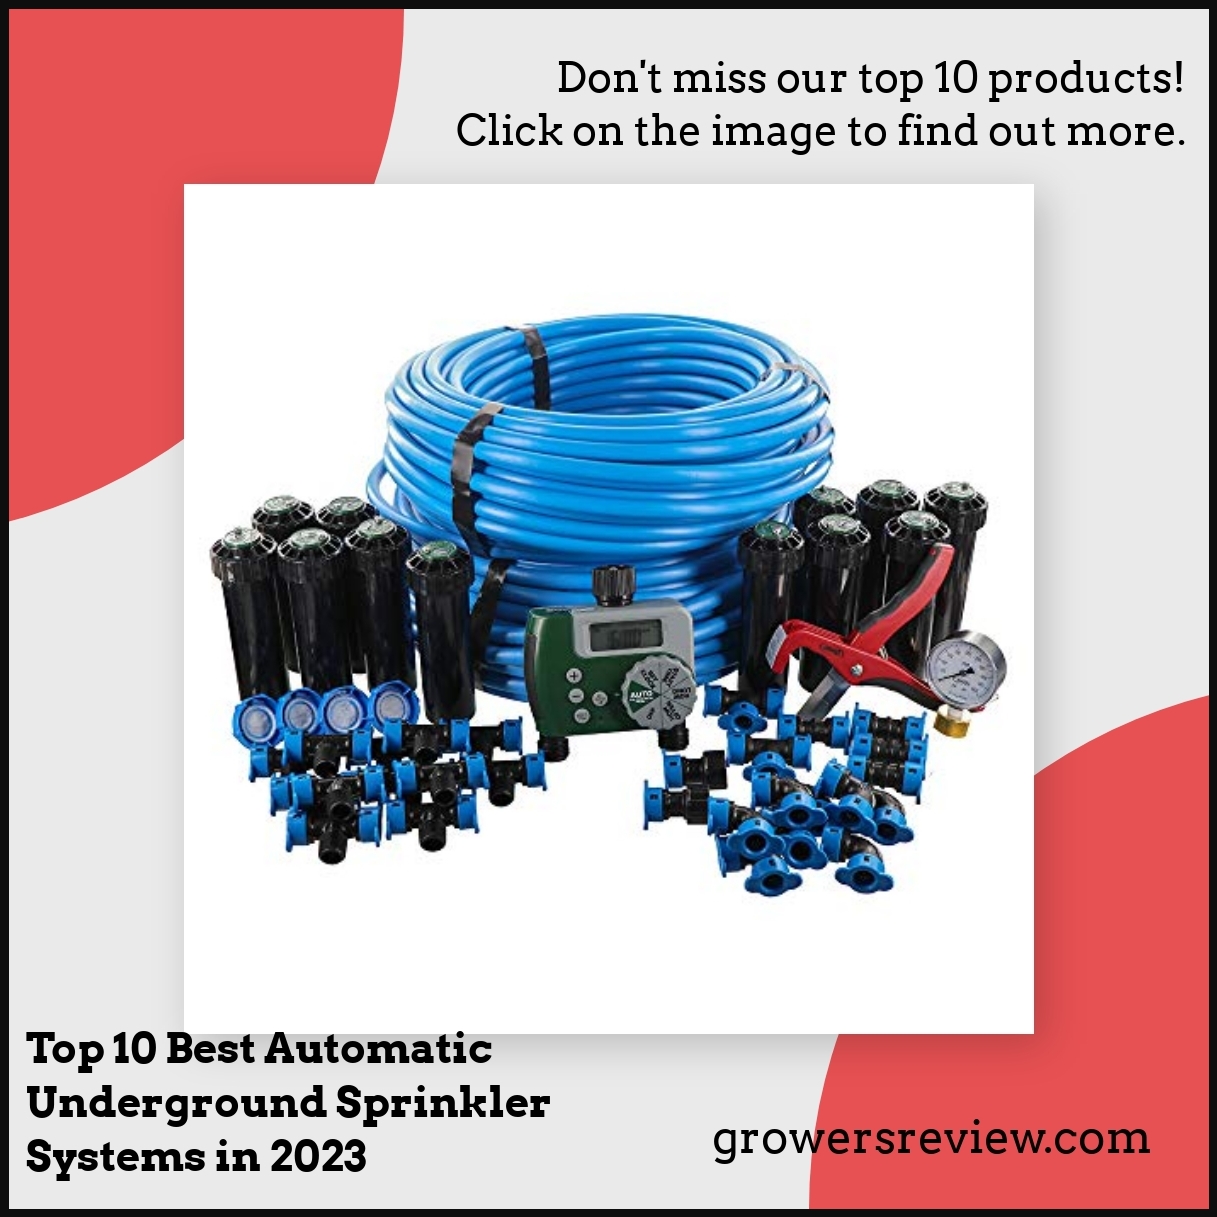 Top 10 Best Automatic Underground Sprinkler Systems in 2023